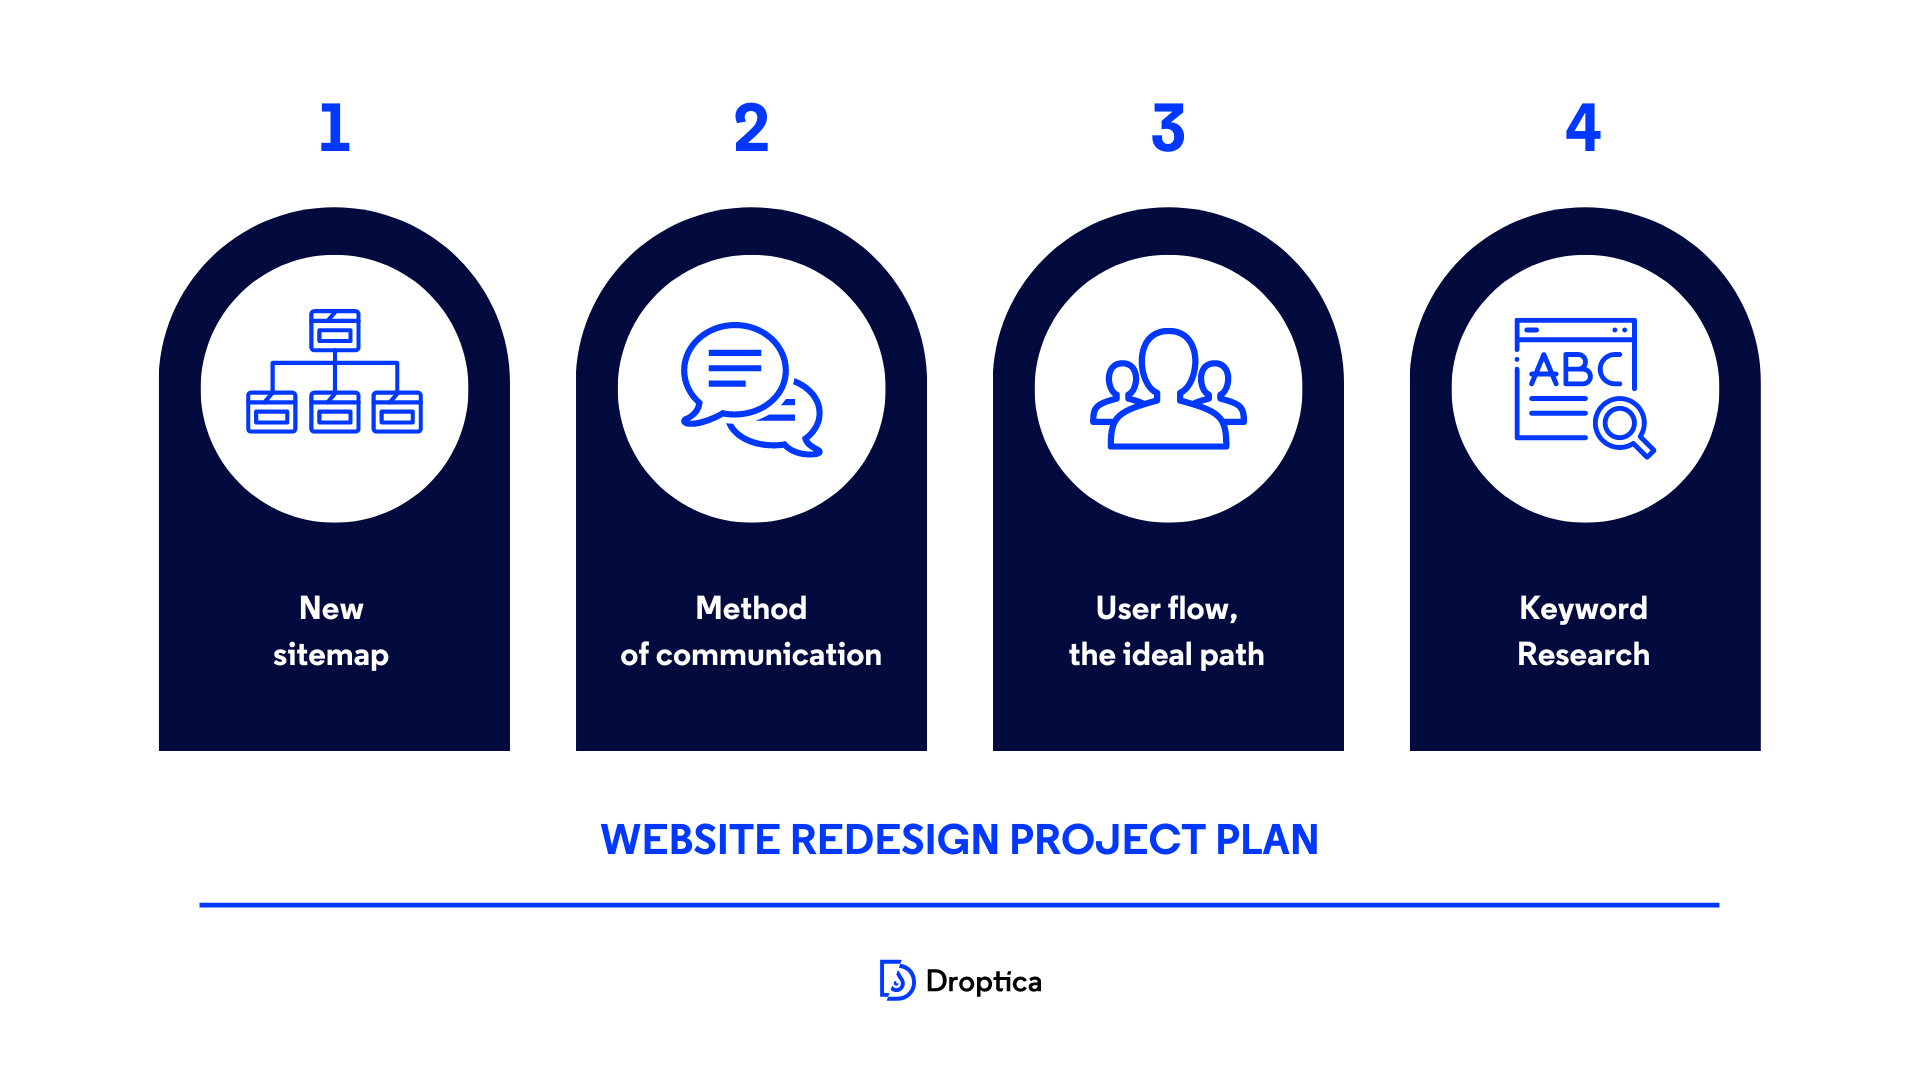 Website redesign project plan includes a new site map, communication, user flow and keyword research